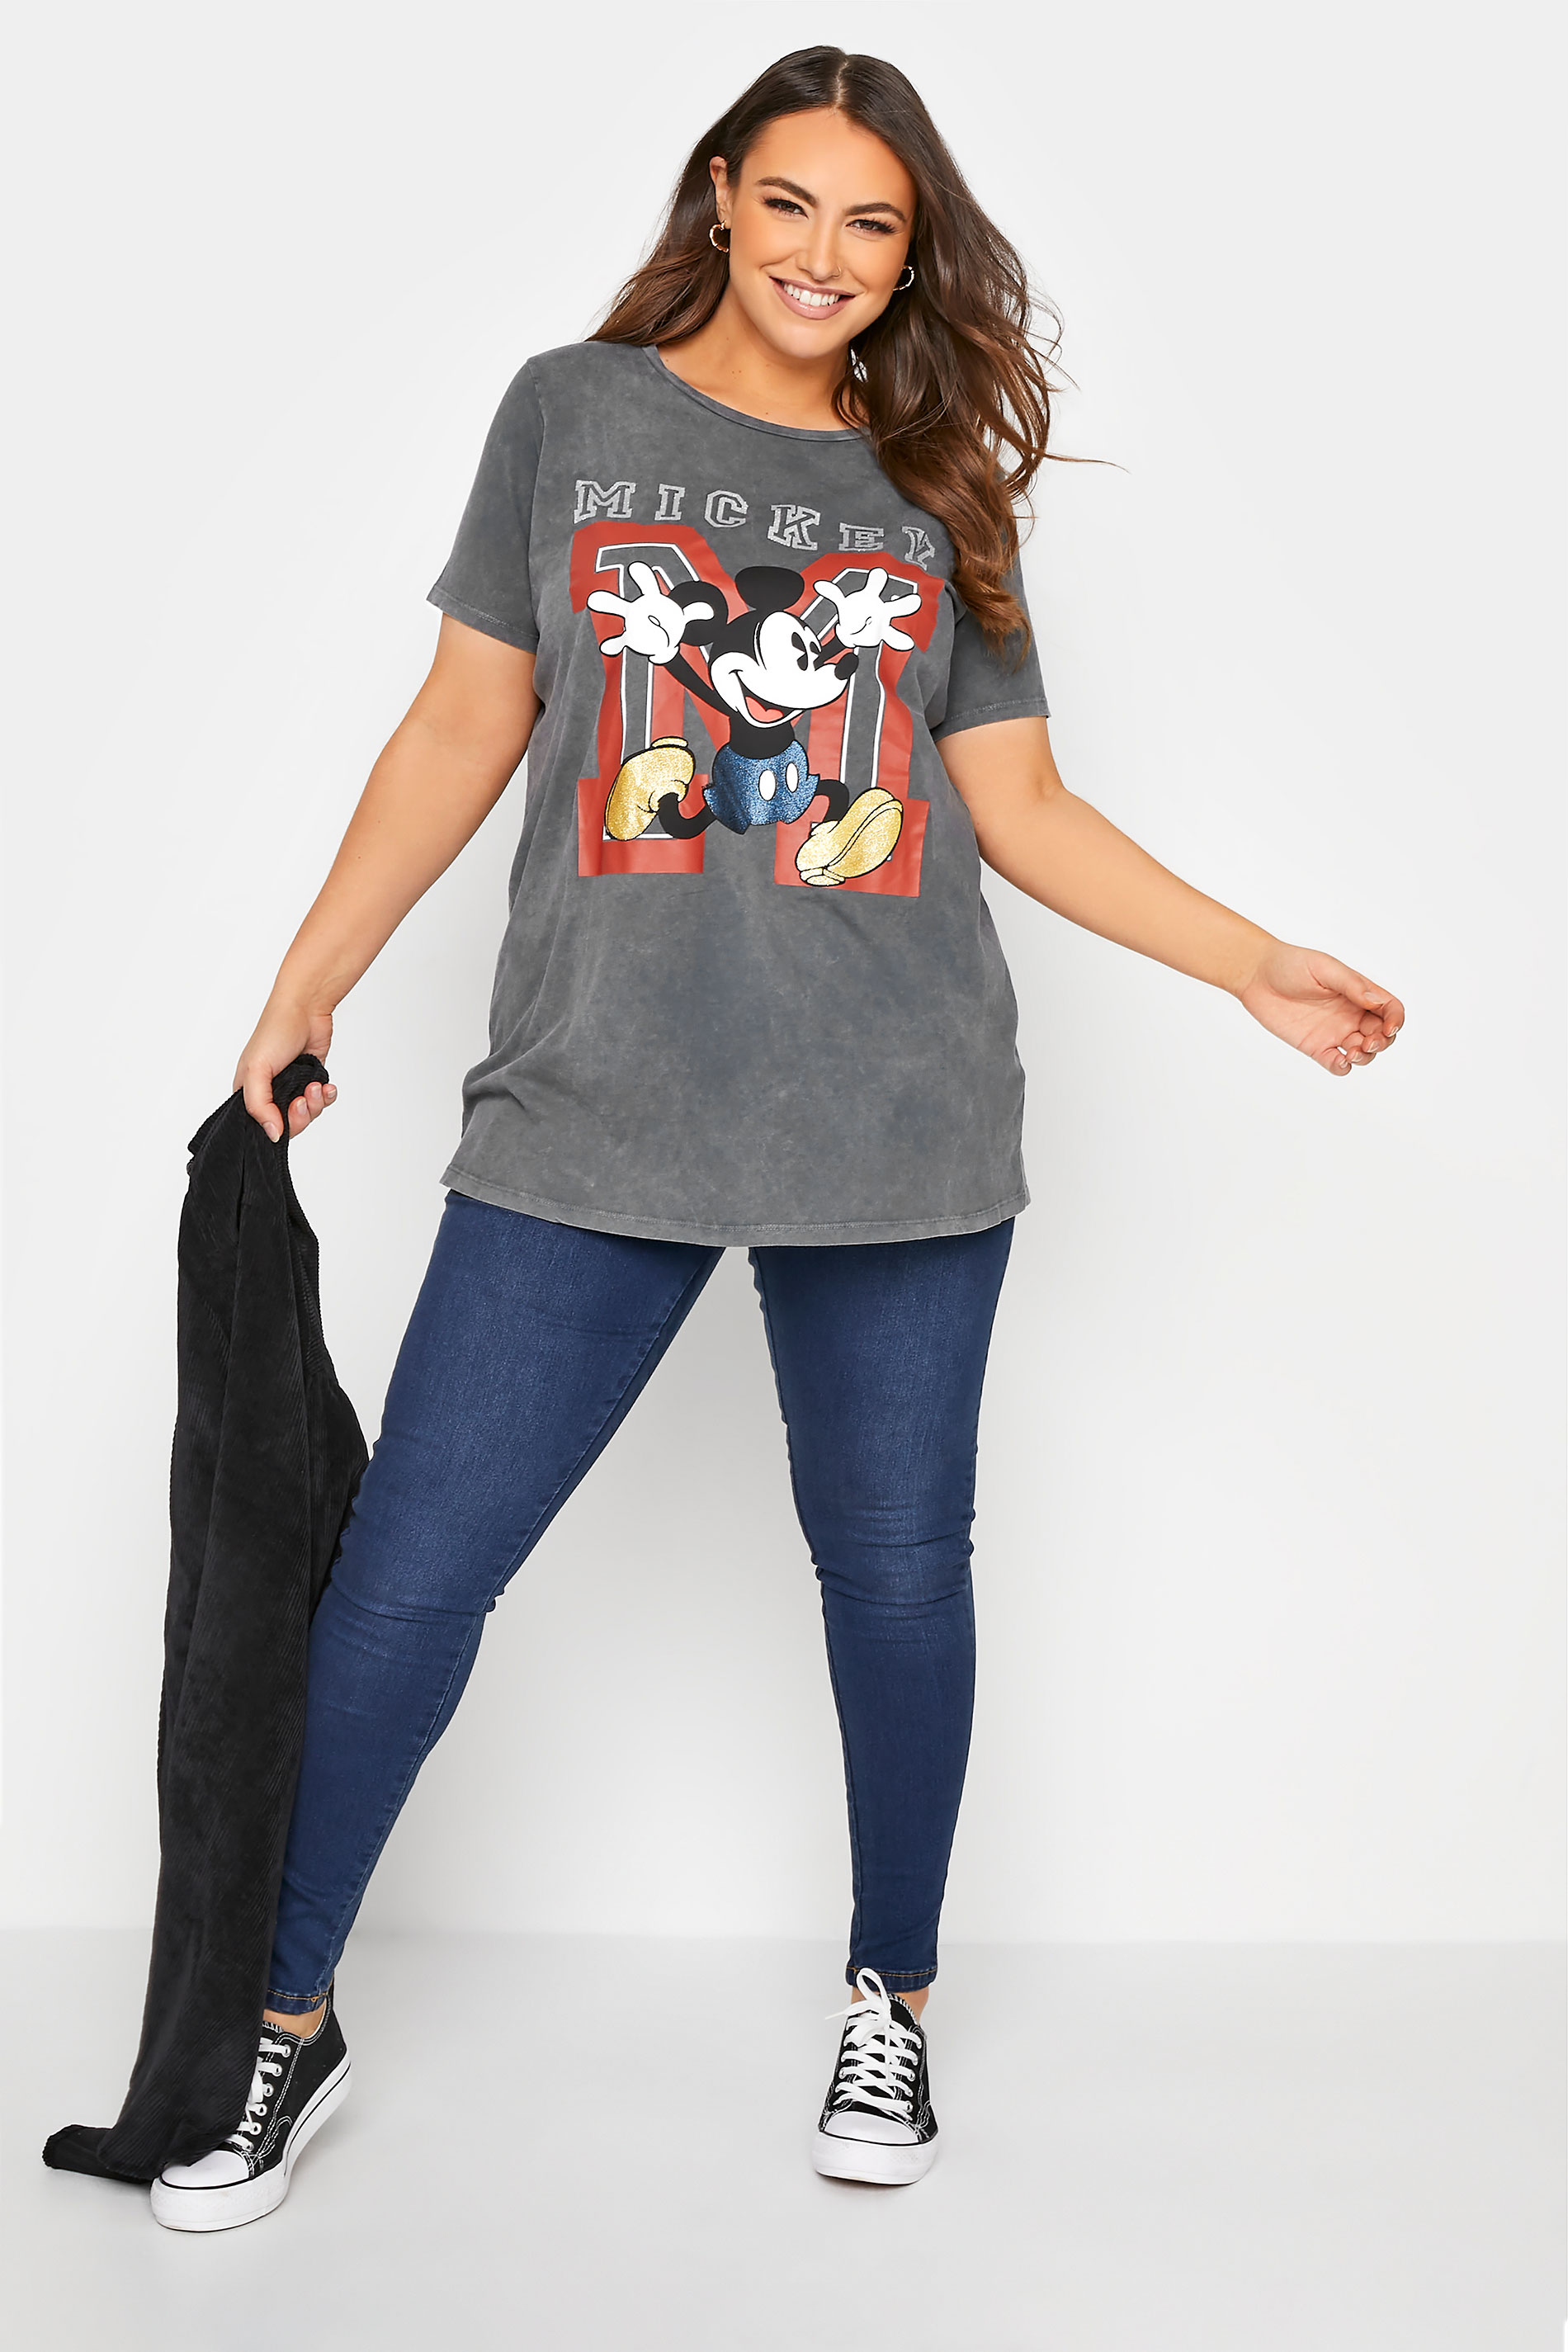 Grande taille  Tops Grande taille  T-Shirts | DISNEY - T-Shirt Gris Mickey Mouse - DC69363